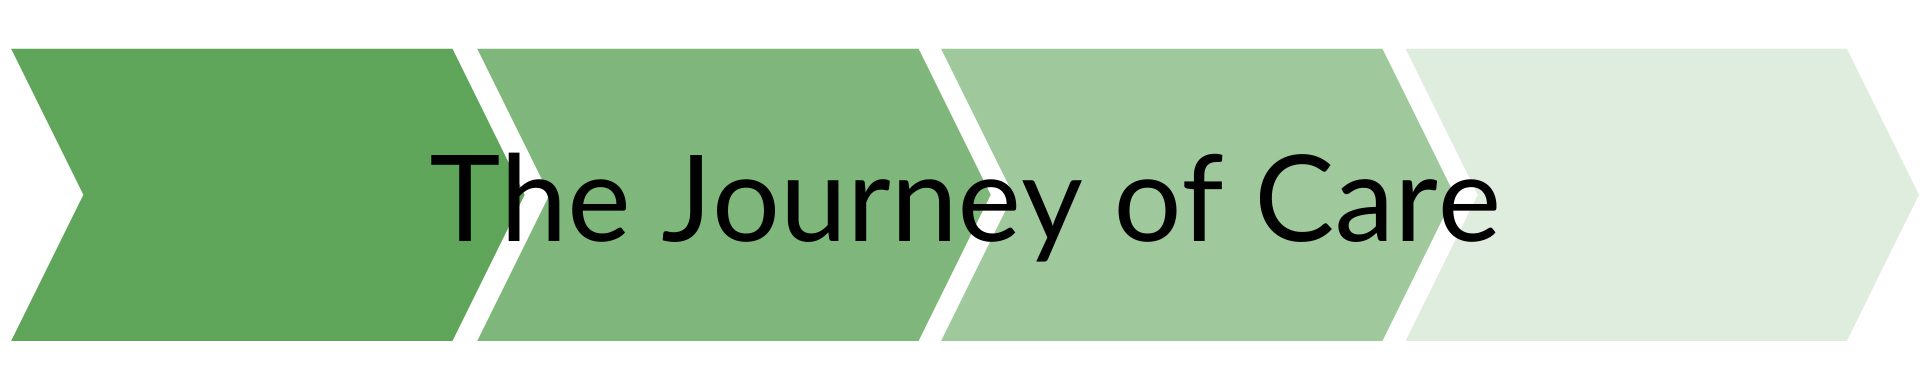 Journey of Care graphic